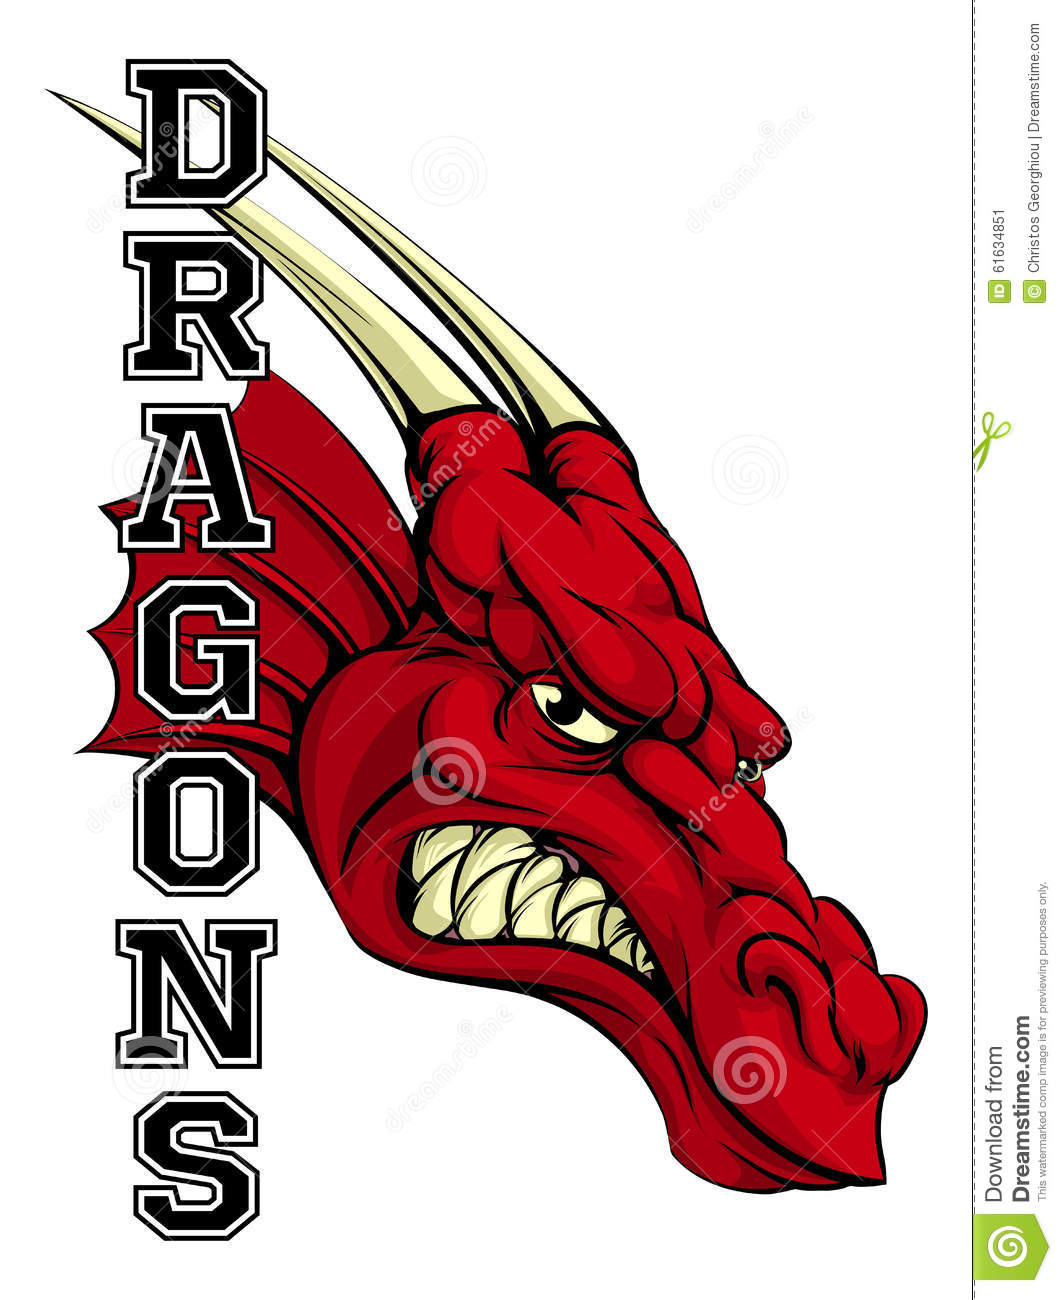 Of A Cartoon Red Dragon Sports Team Mascot With The Text Dragons